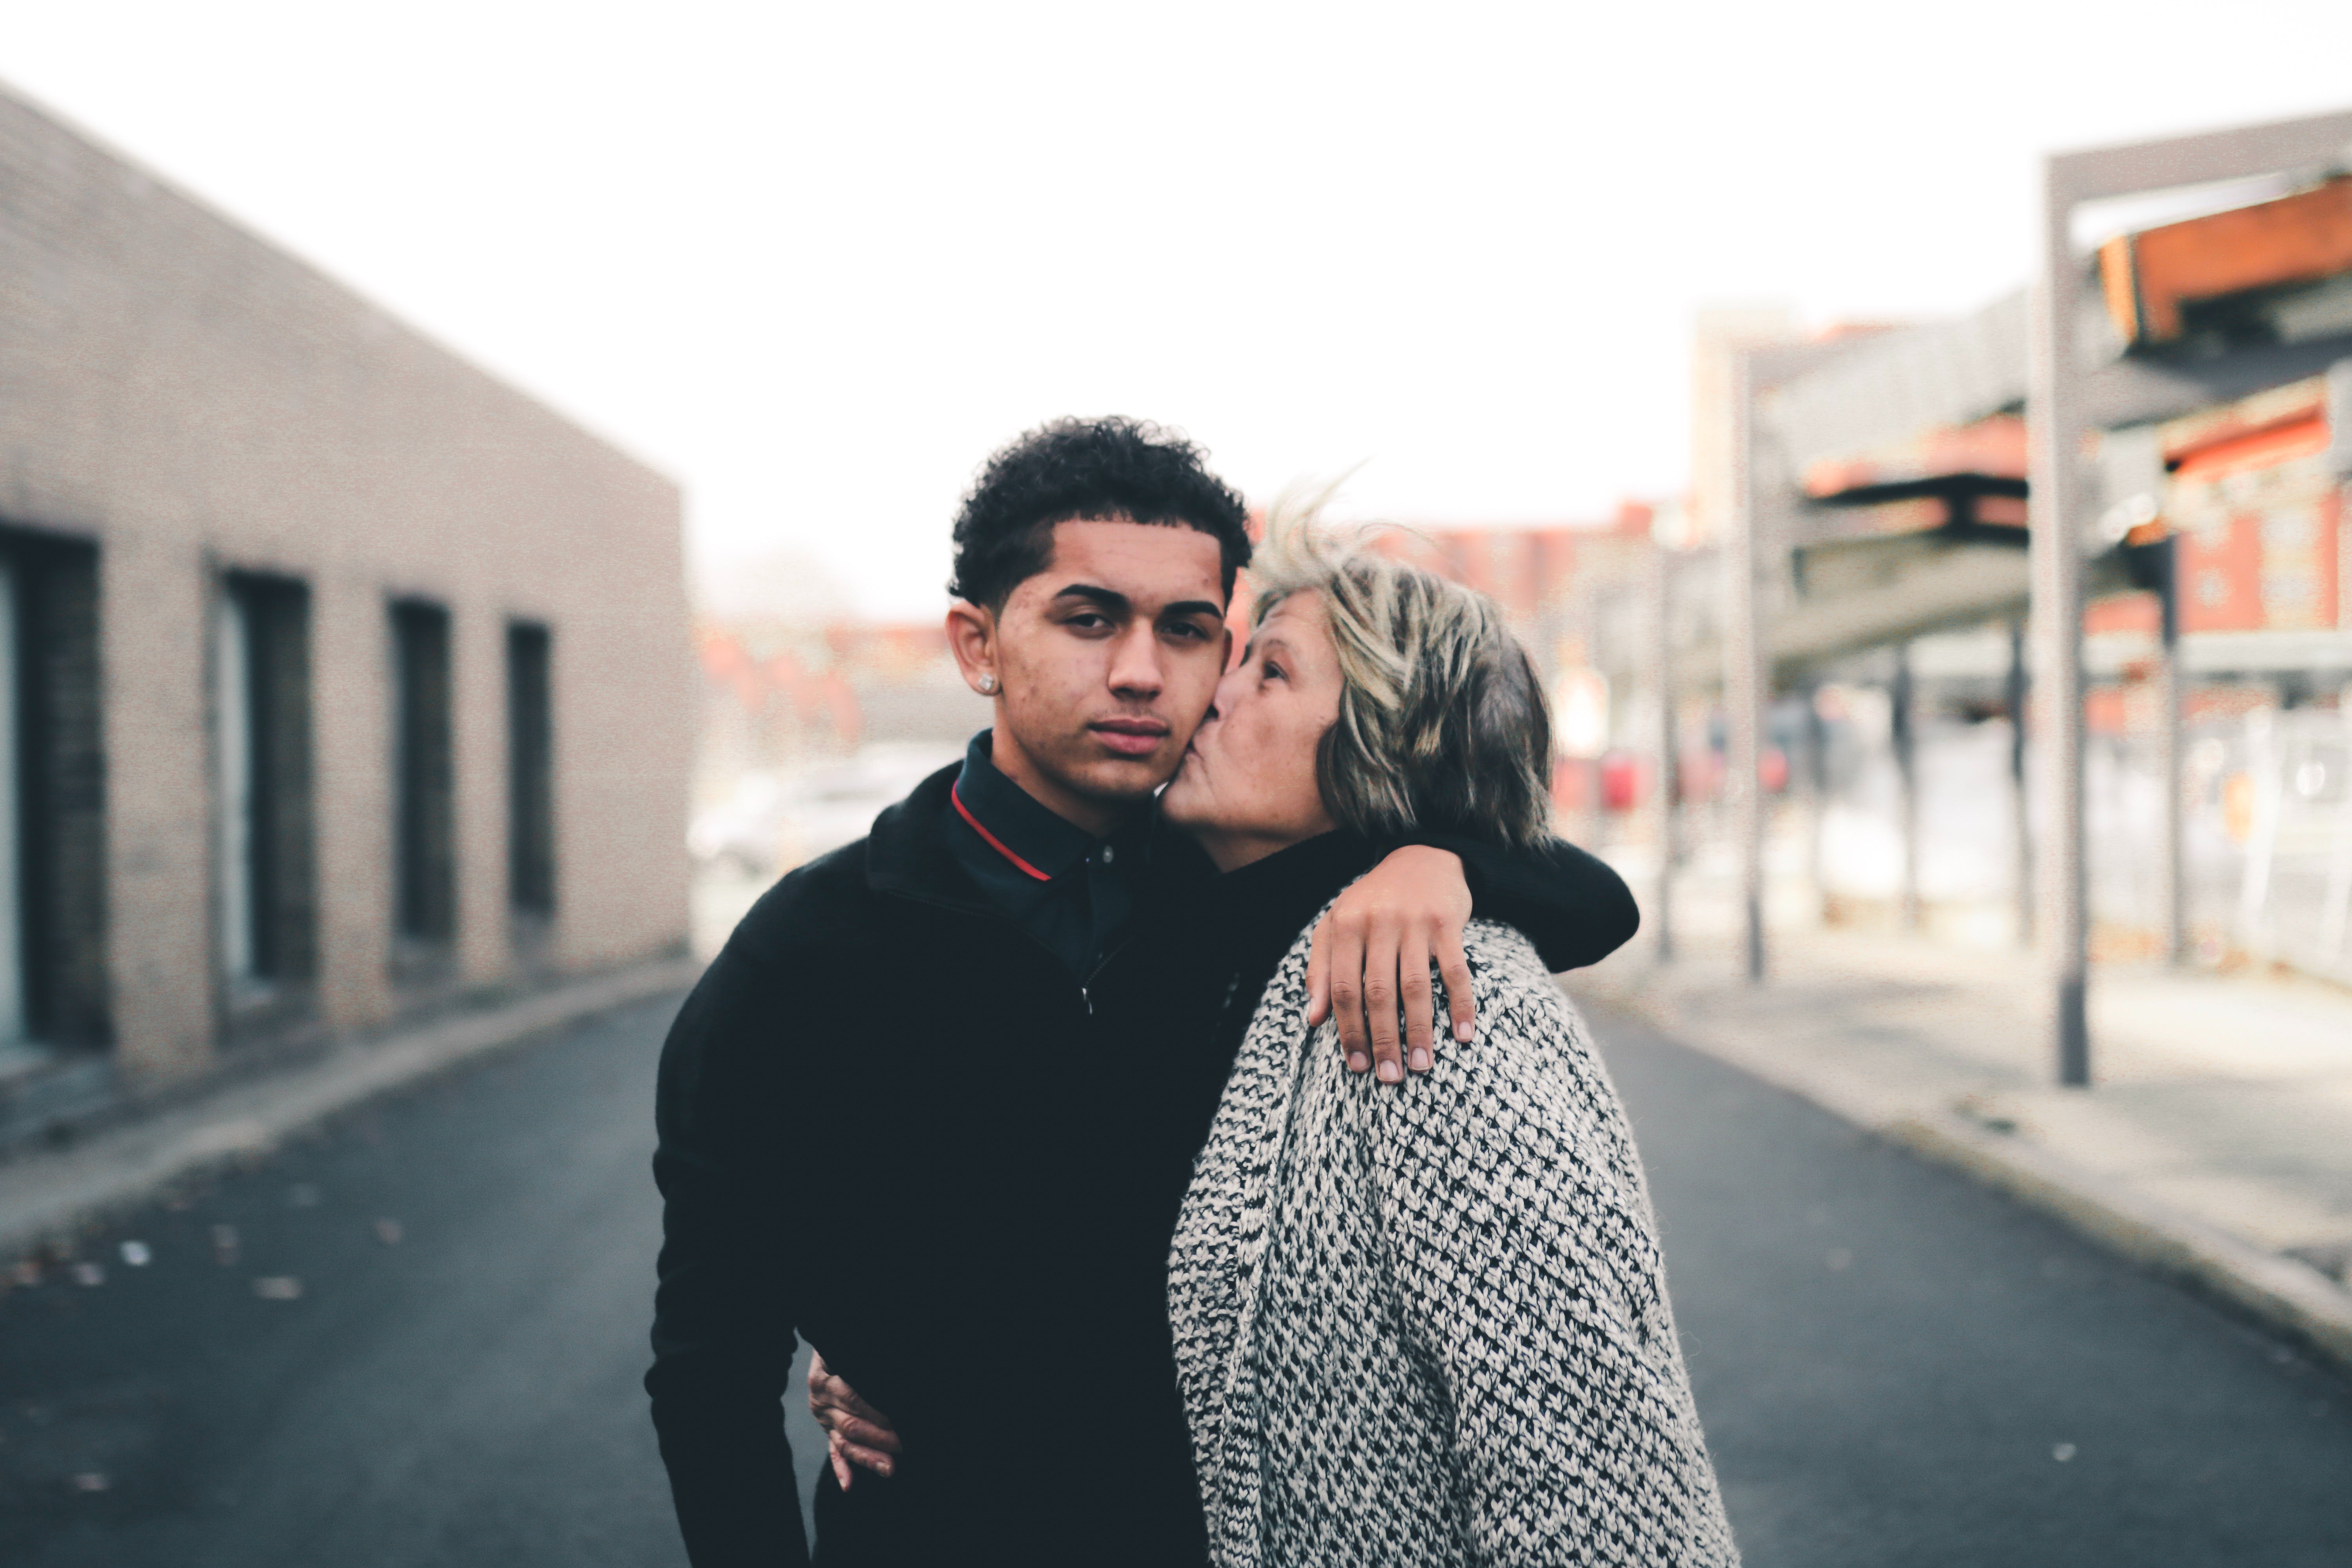 A young man receiving a kiss on the cheek from an older woman | Source: Pexels